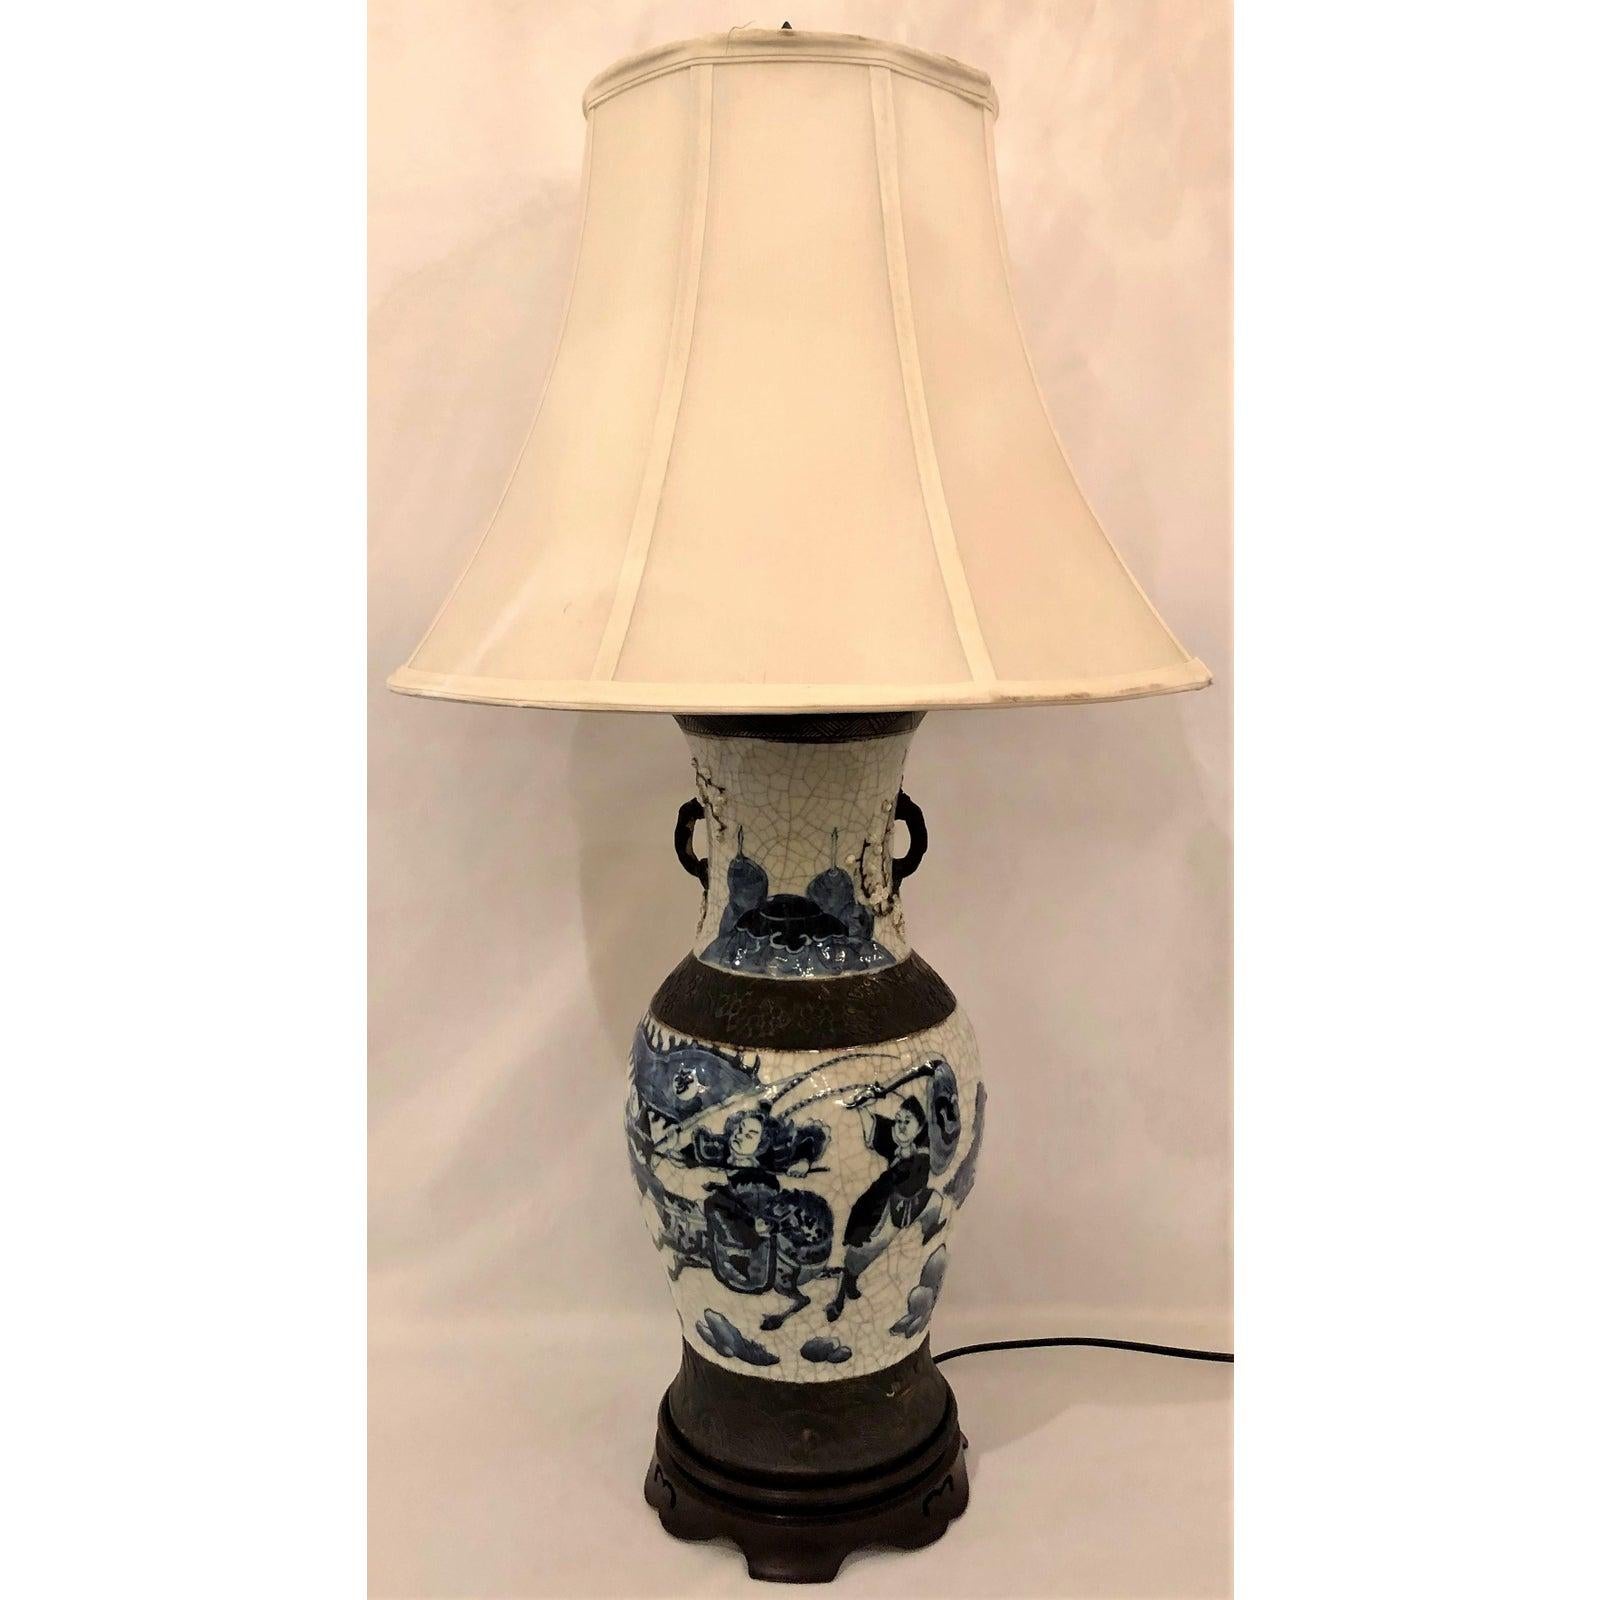 For fanciers of blue and white lamps, this is a nice one and rests on a carved mahogany base.
 